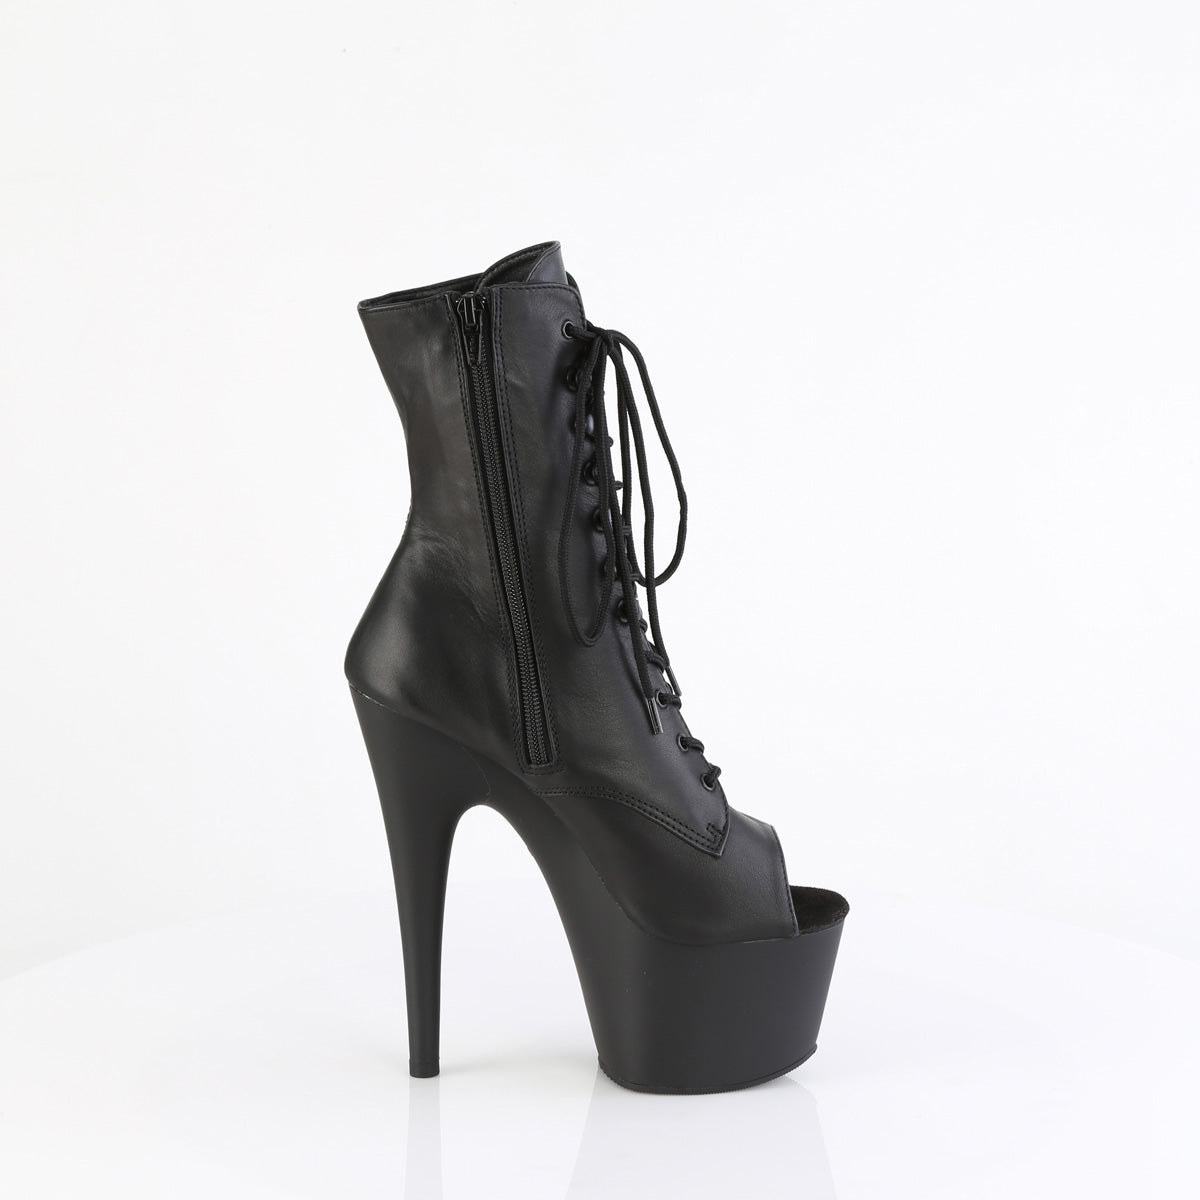 7 Inch Heel ADORE-1021 Black Leather